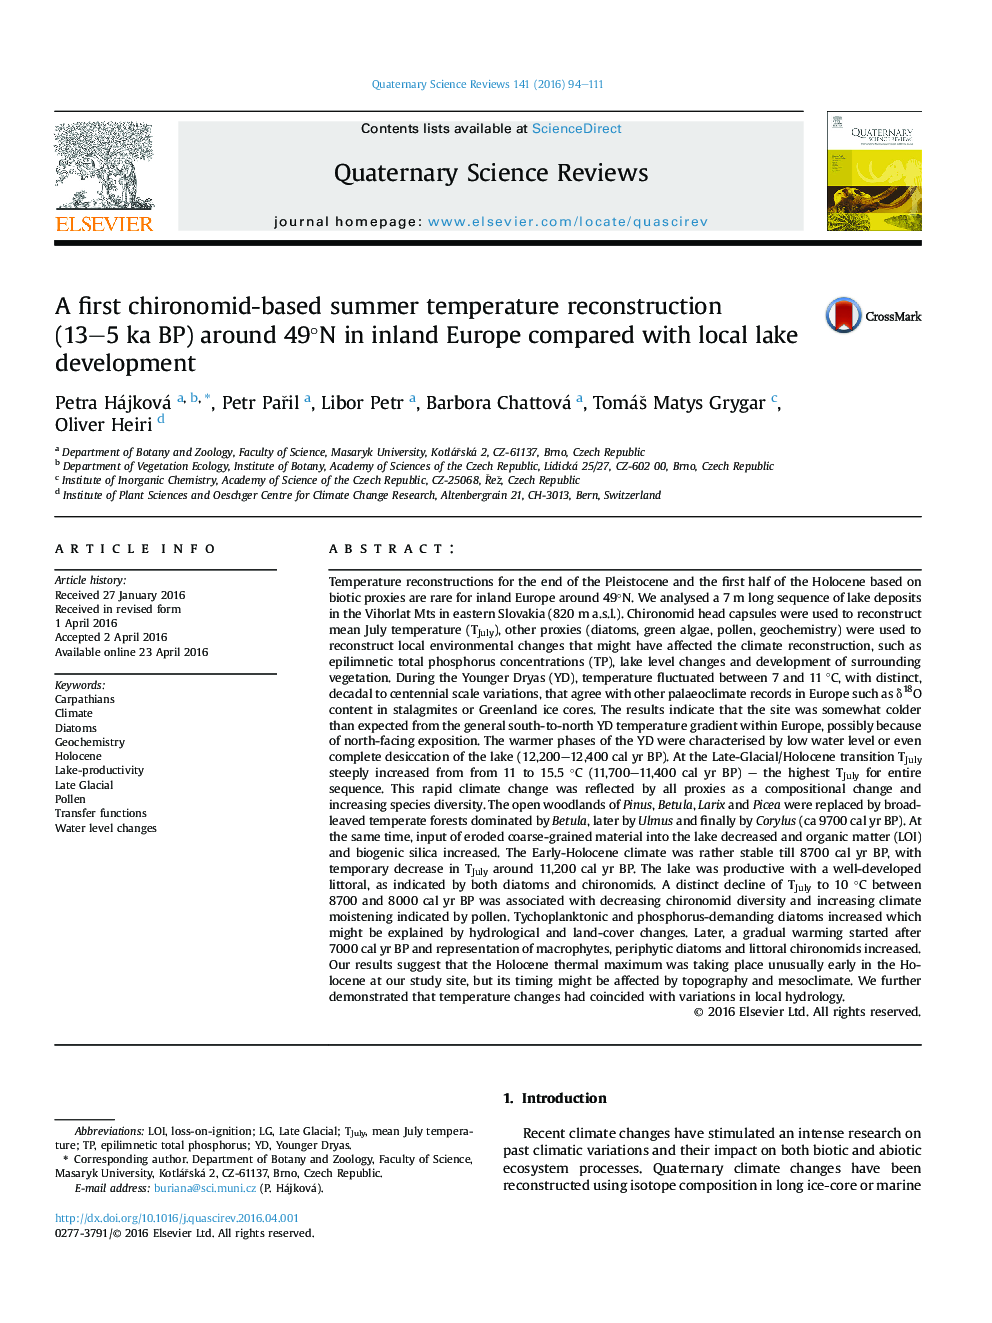 A first chironomid-based summer temperature reconstruction (13–5 ka BP) around 49°N in inland Europe compared with local lake development